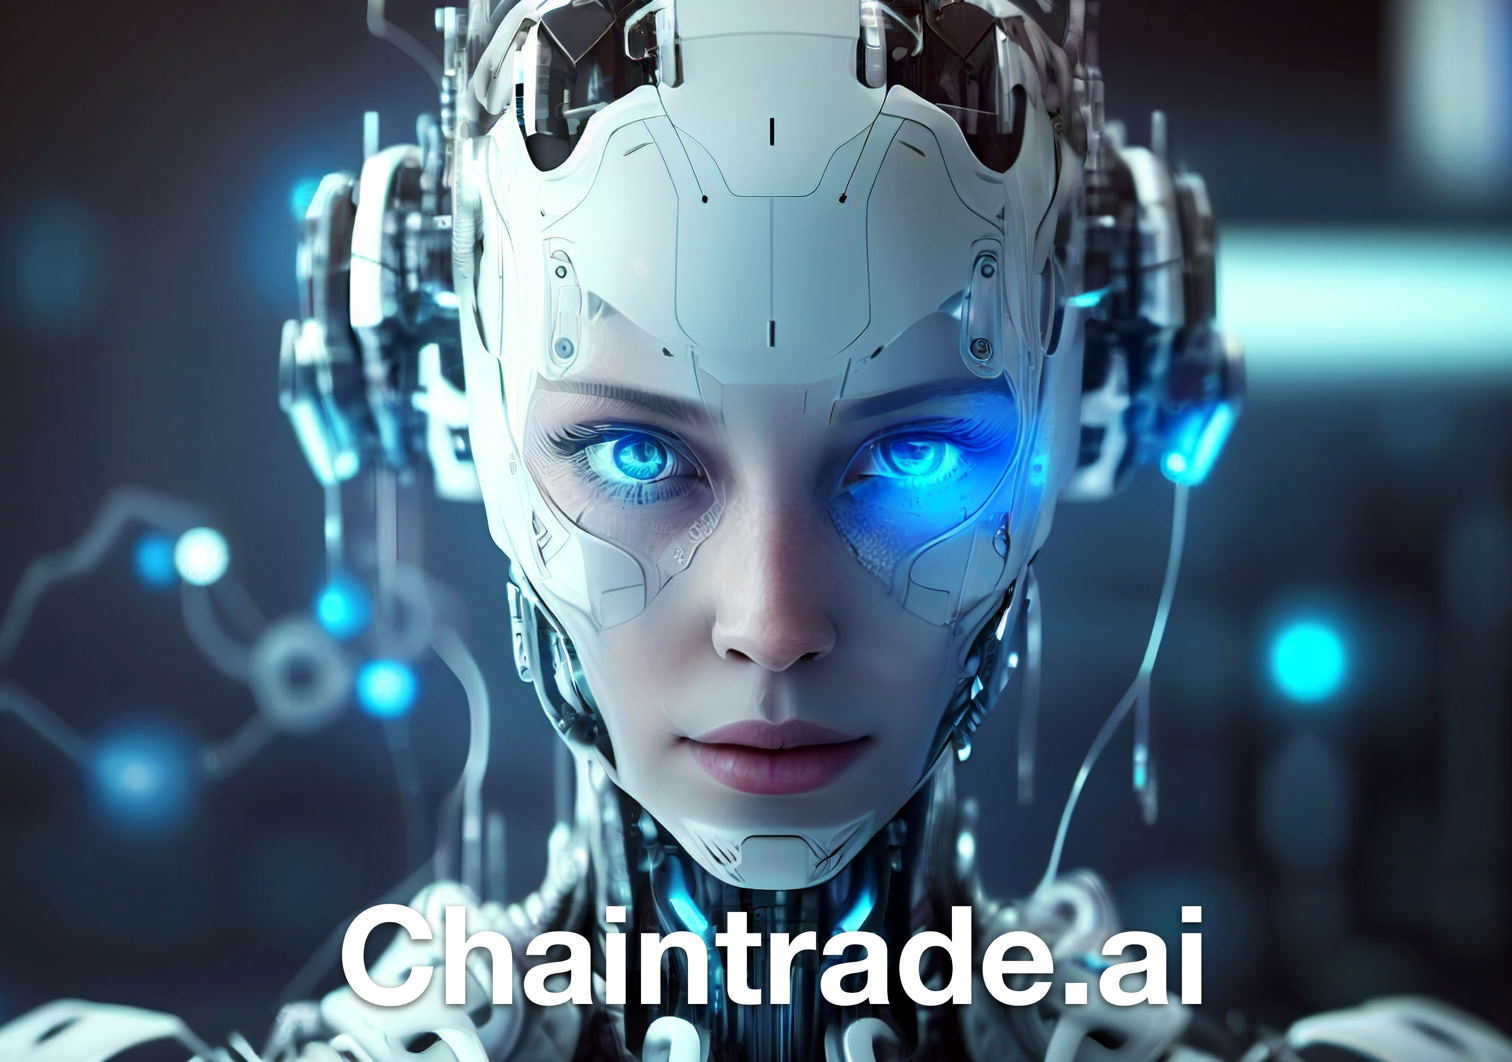 SMC Enters into Acquisition Agreement to Purchase 100% of the Assets of ChainTrade Ltd. Launches AI-Powered Research Platform.